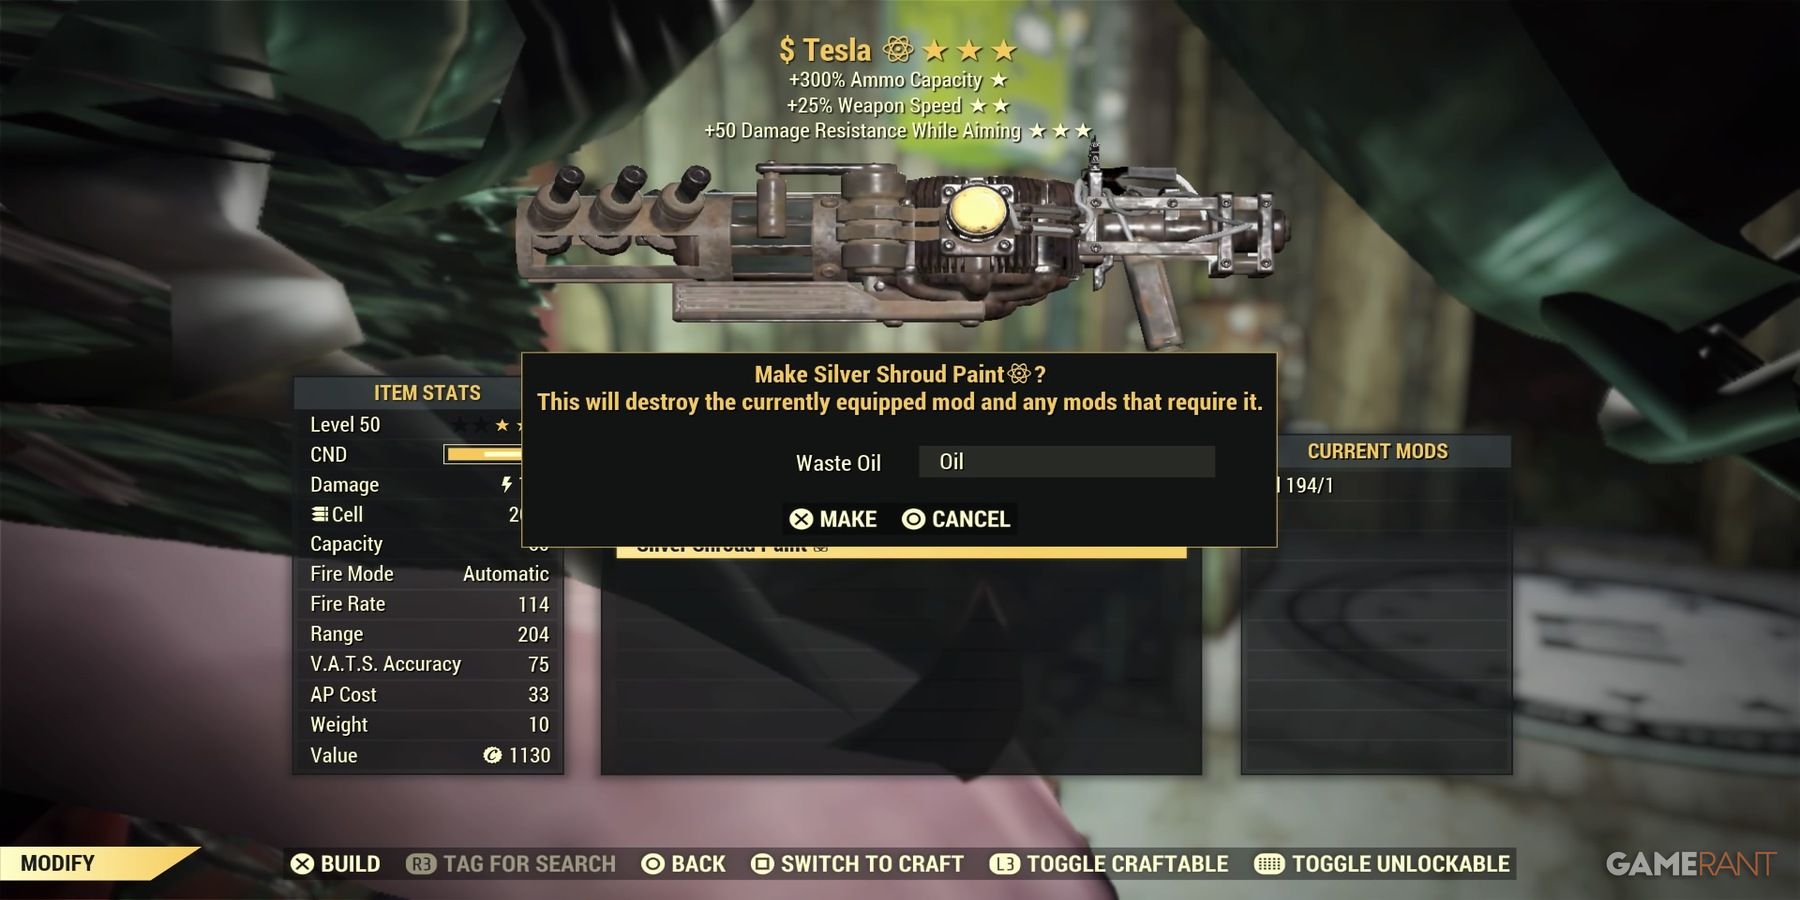 Modifying Weapons in Fallout 76